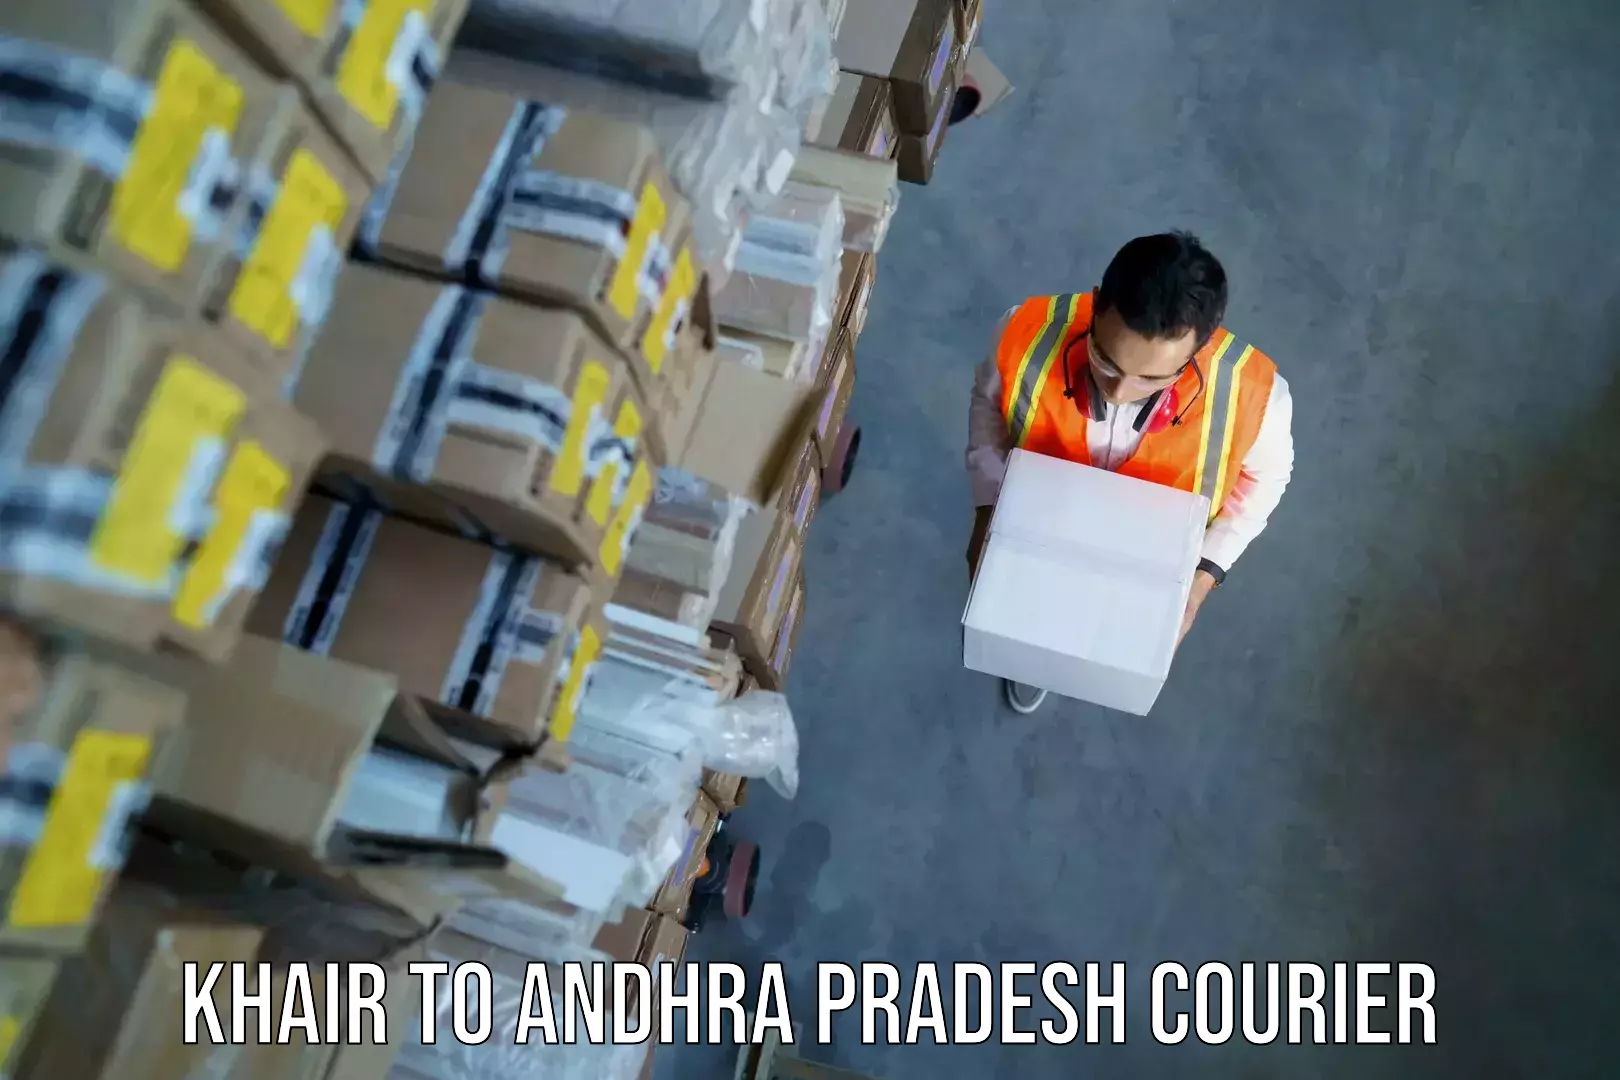 Luggage shipping specialists Khair to Andhra Pradesh